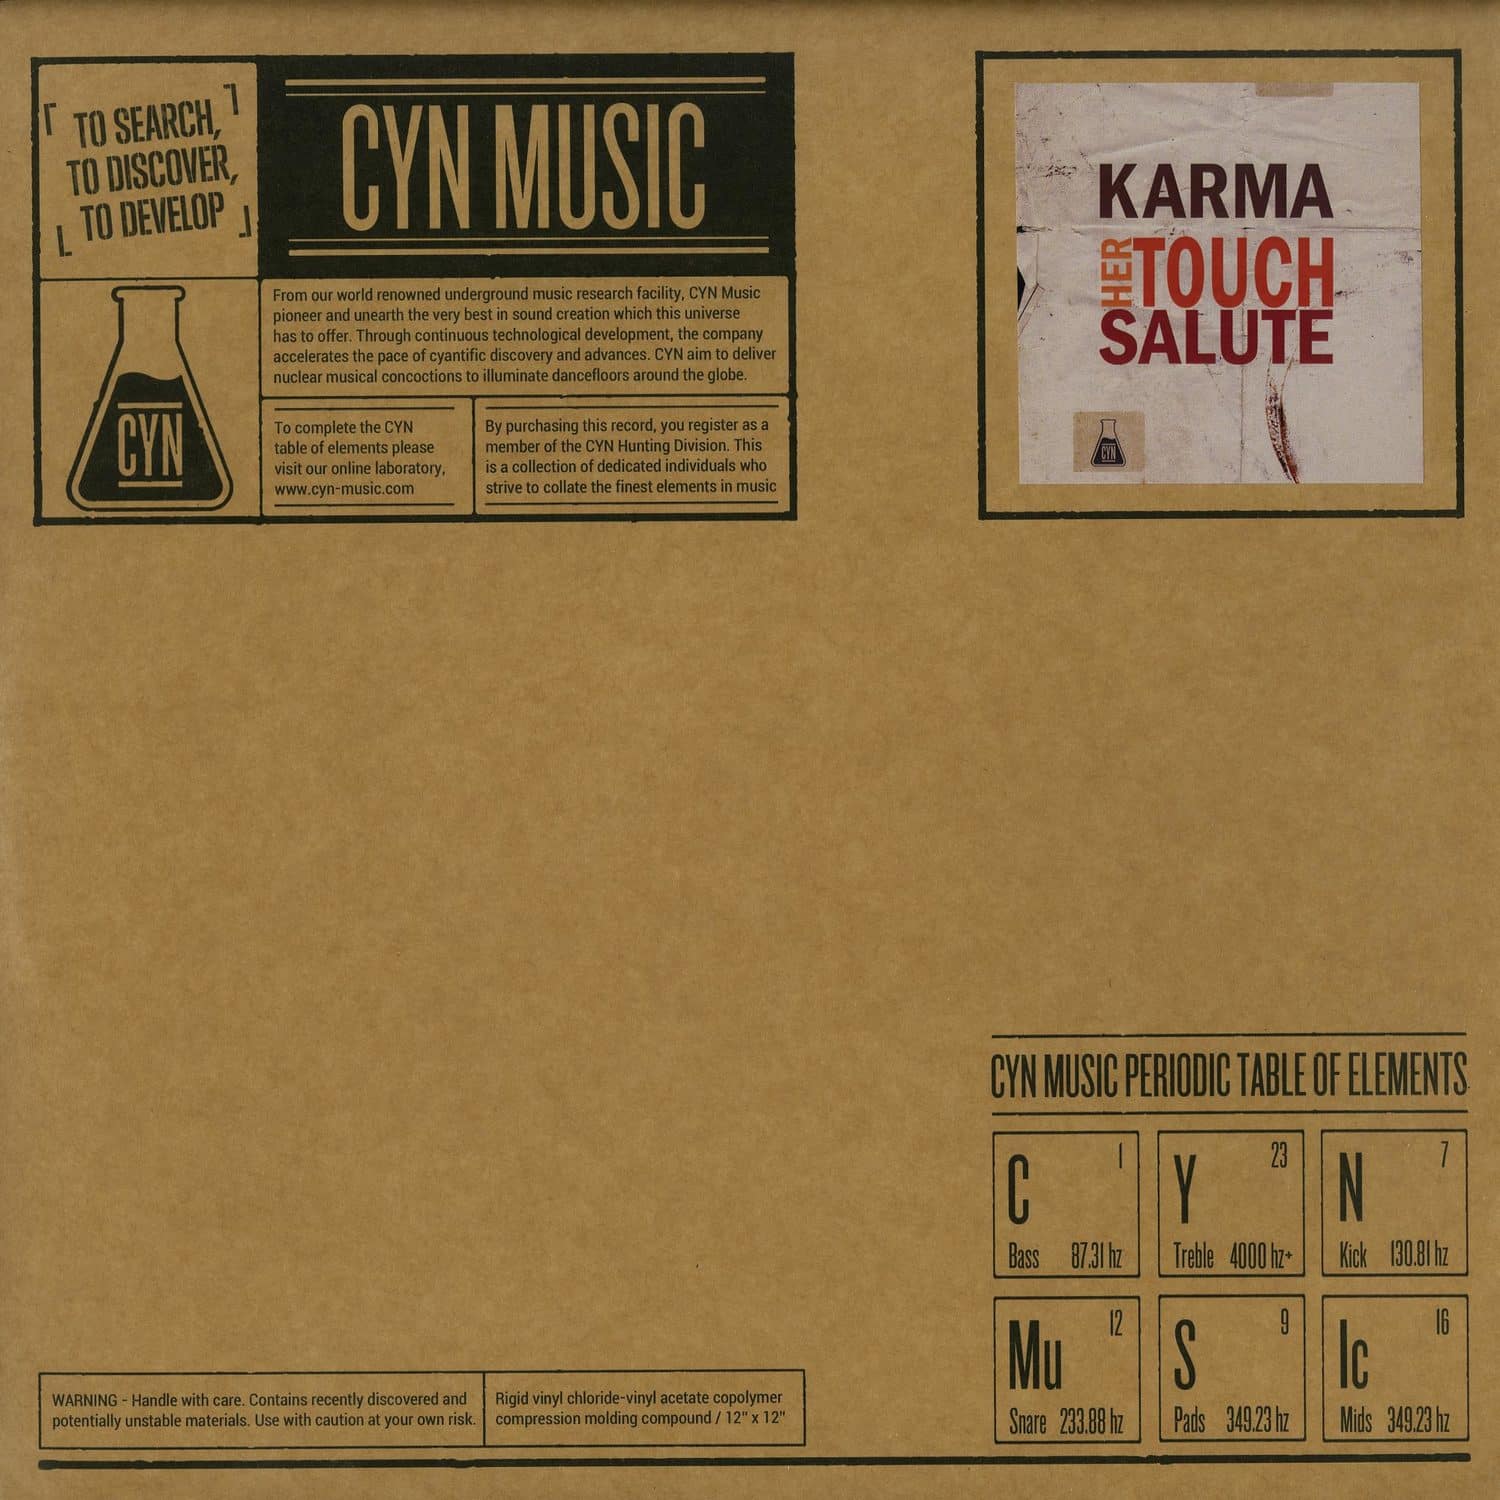 Karma - HER TOUCH / SALUTE